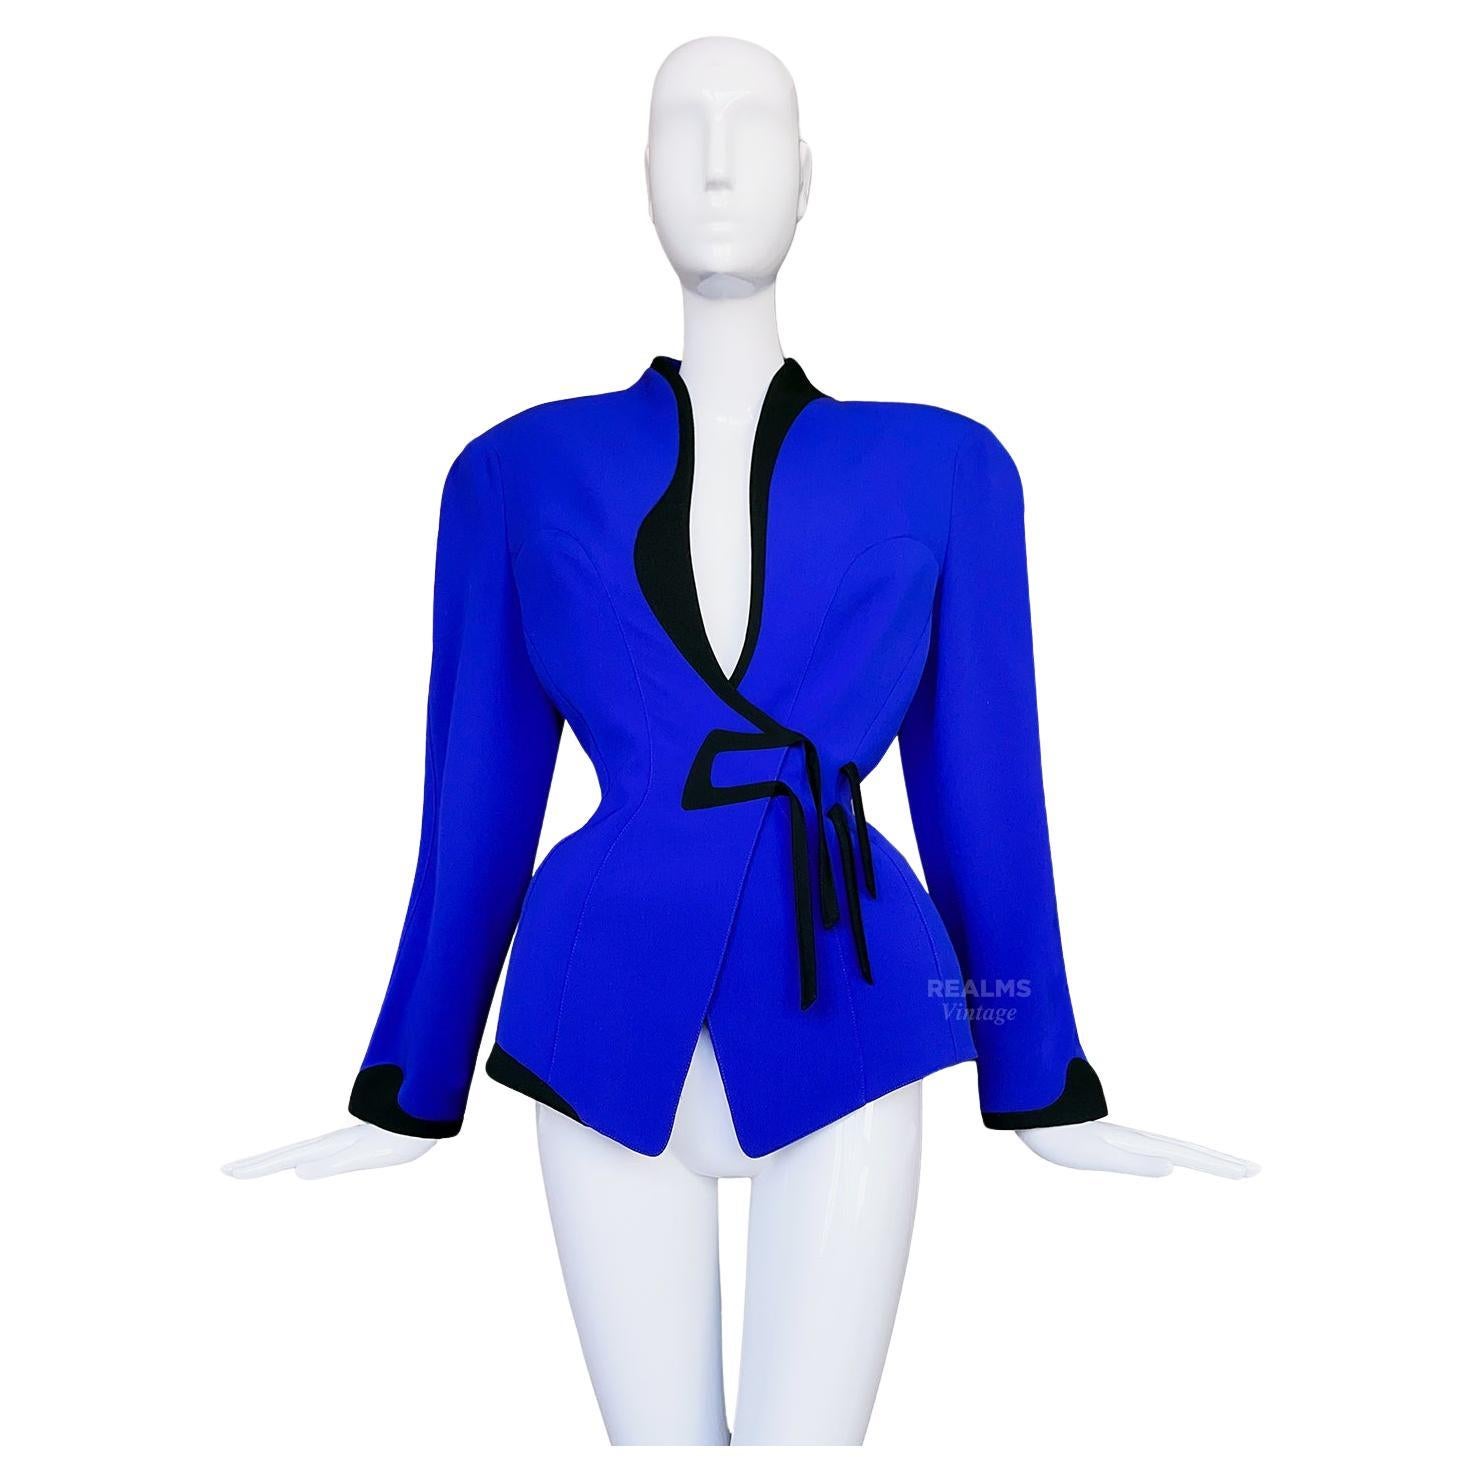 Thierry Mugler 1987 Rare Archival Electric Blue Jacket For Sale